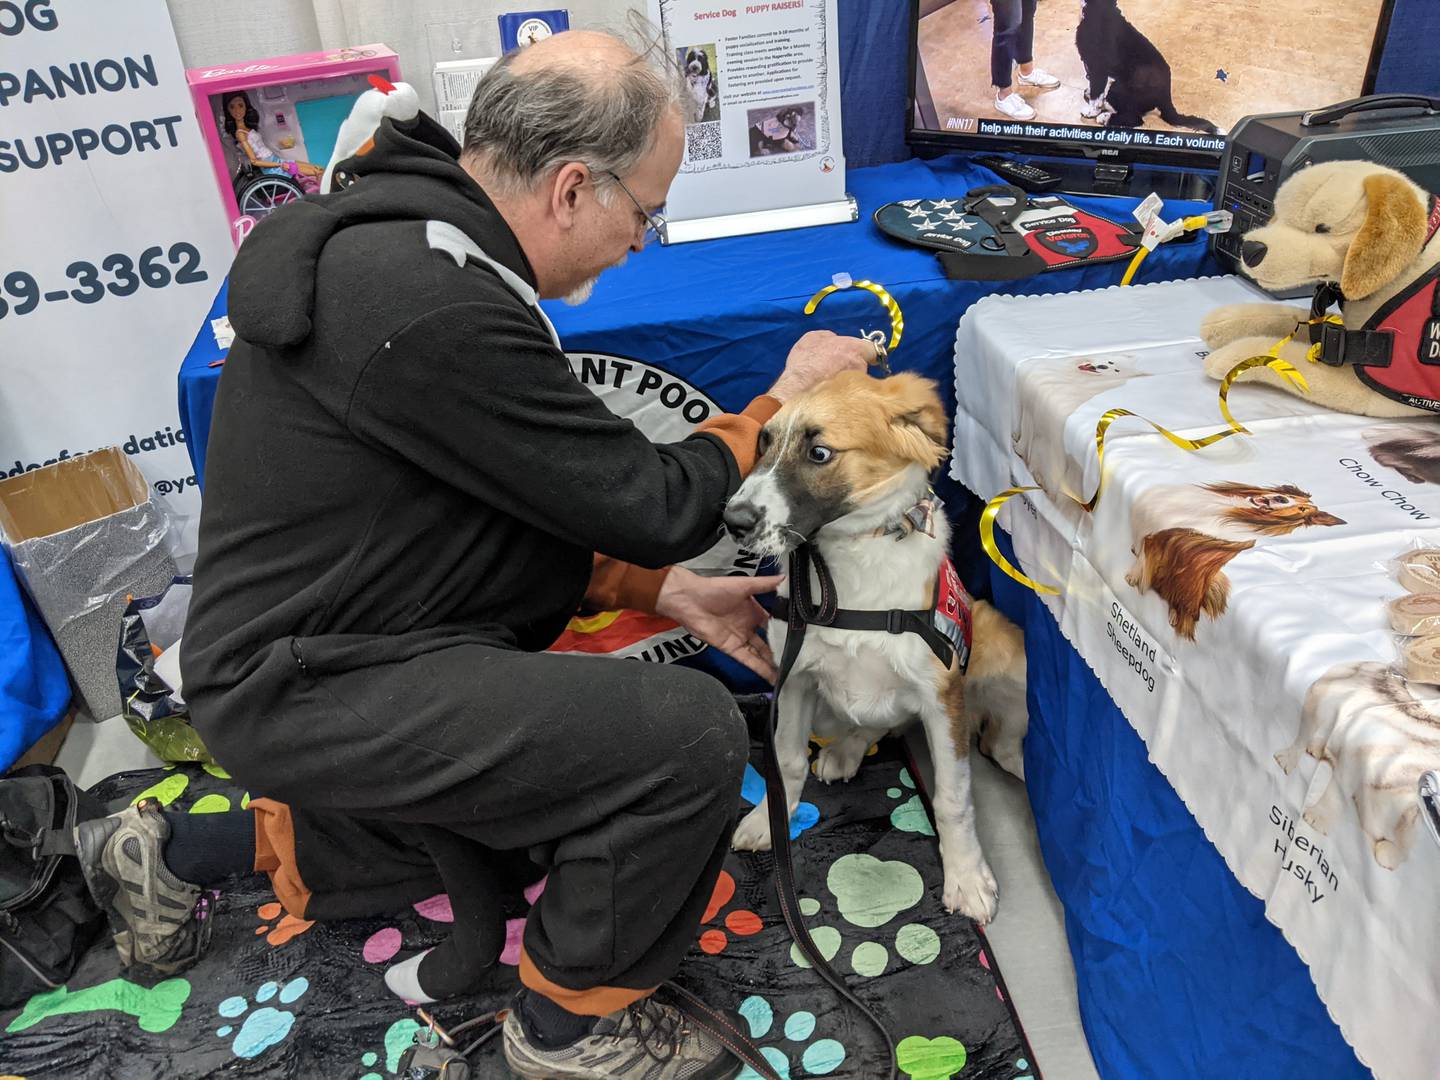 Those attending the Oswego Hometown Expo at Oswego High School on Feb. 24 had the chance to meet Blair Peters of VIP Service Dog Organizationalong with six-month-old Ripley, who is in training to become a service dog.